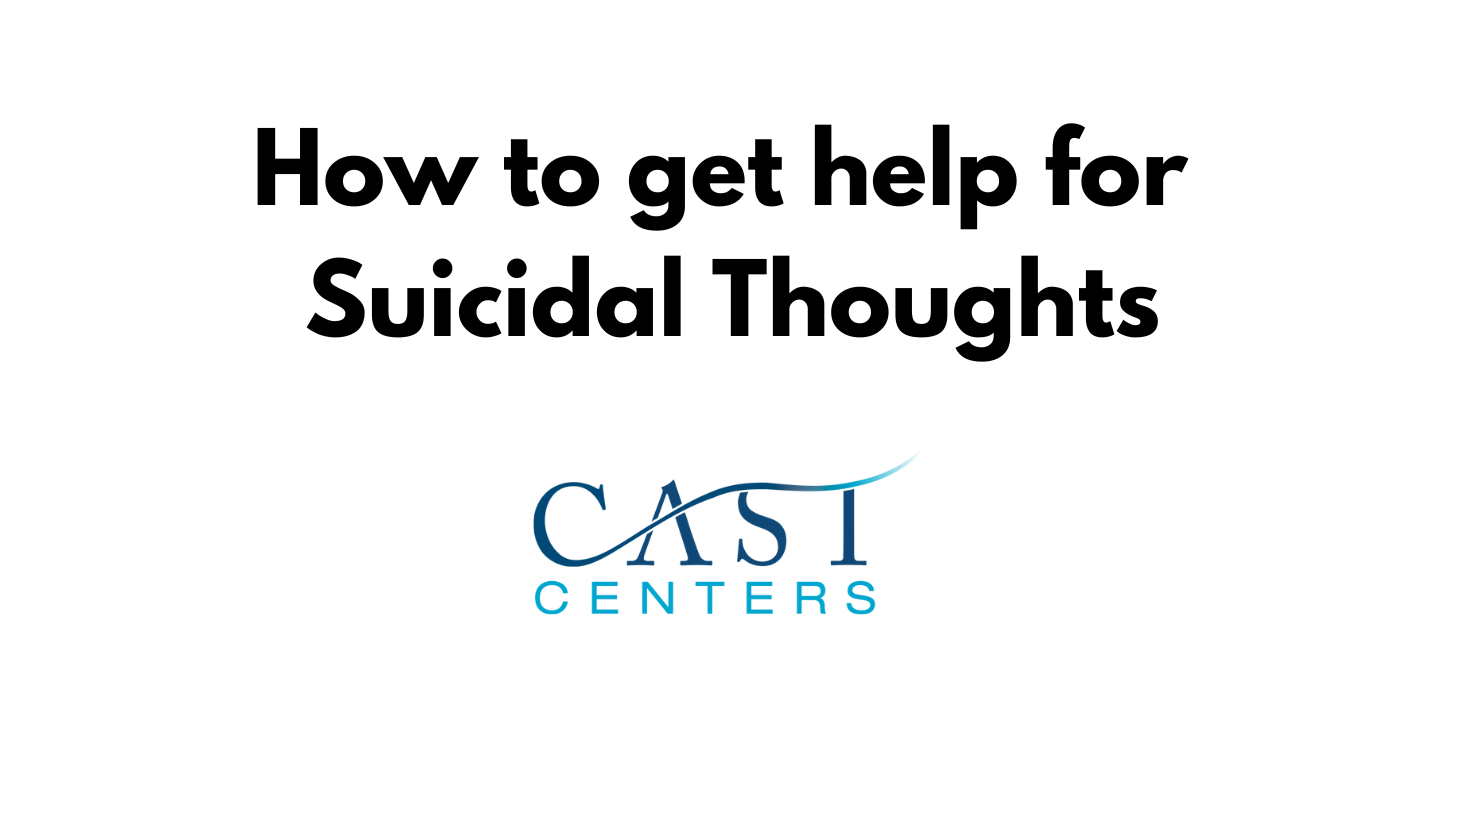 How to get help for suicidal thoughts